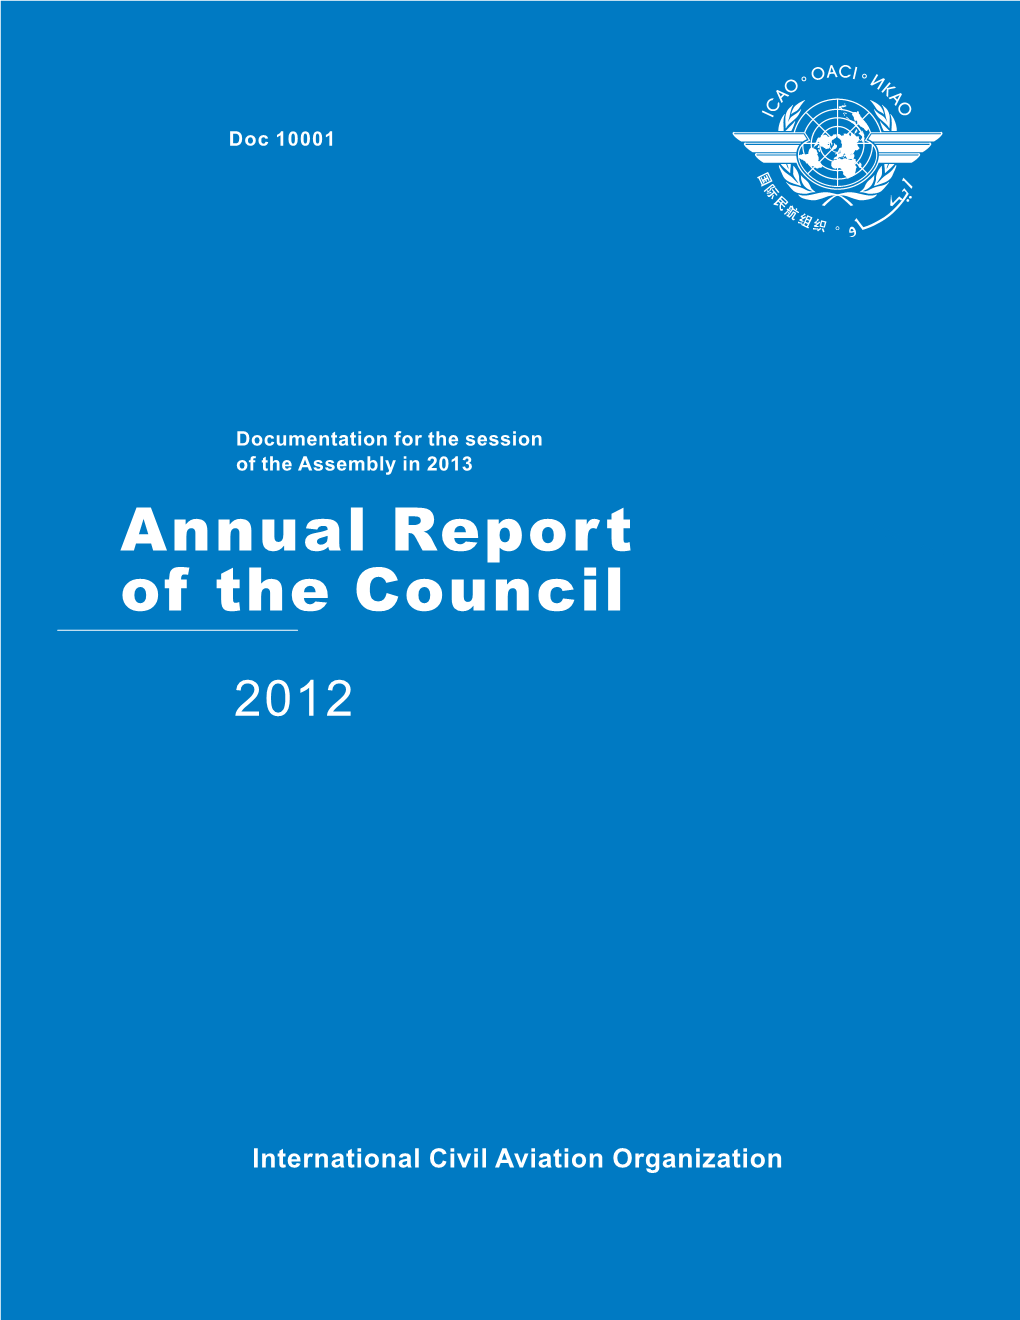 Annual Report of the Council 2012